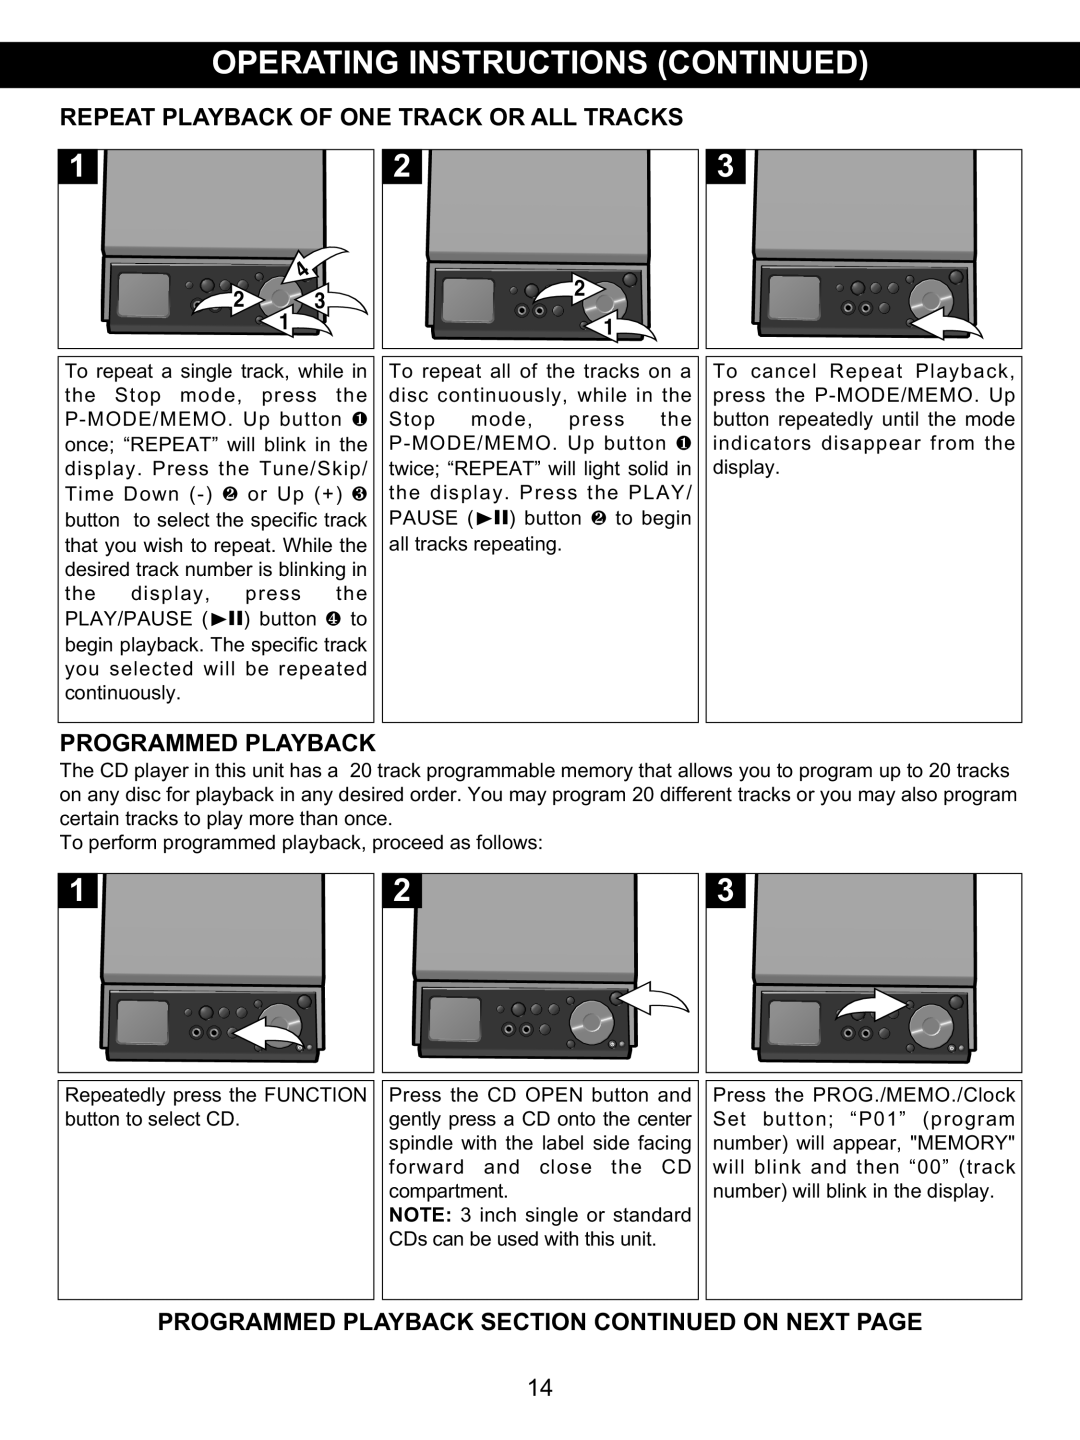 Memorex MX4139 manual Repeat Playback Of One Track Or All Tracks, Programmed Playback 